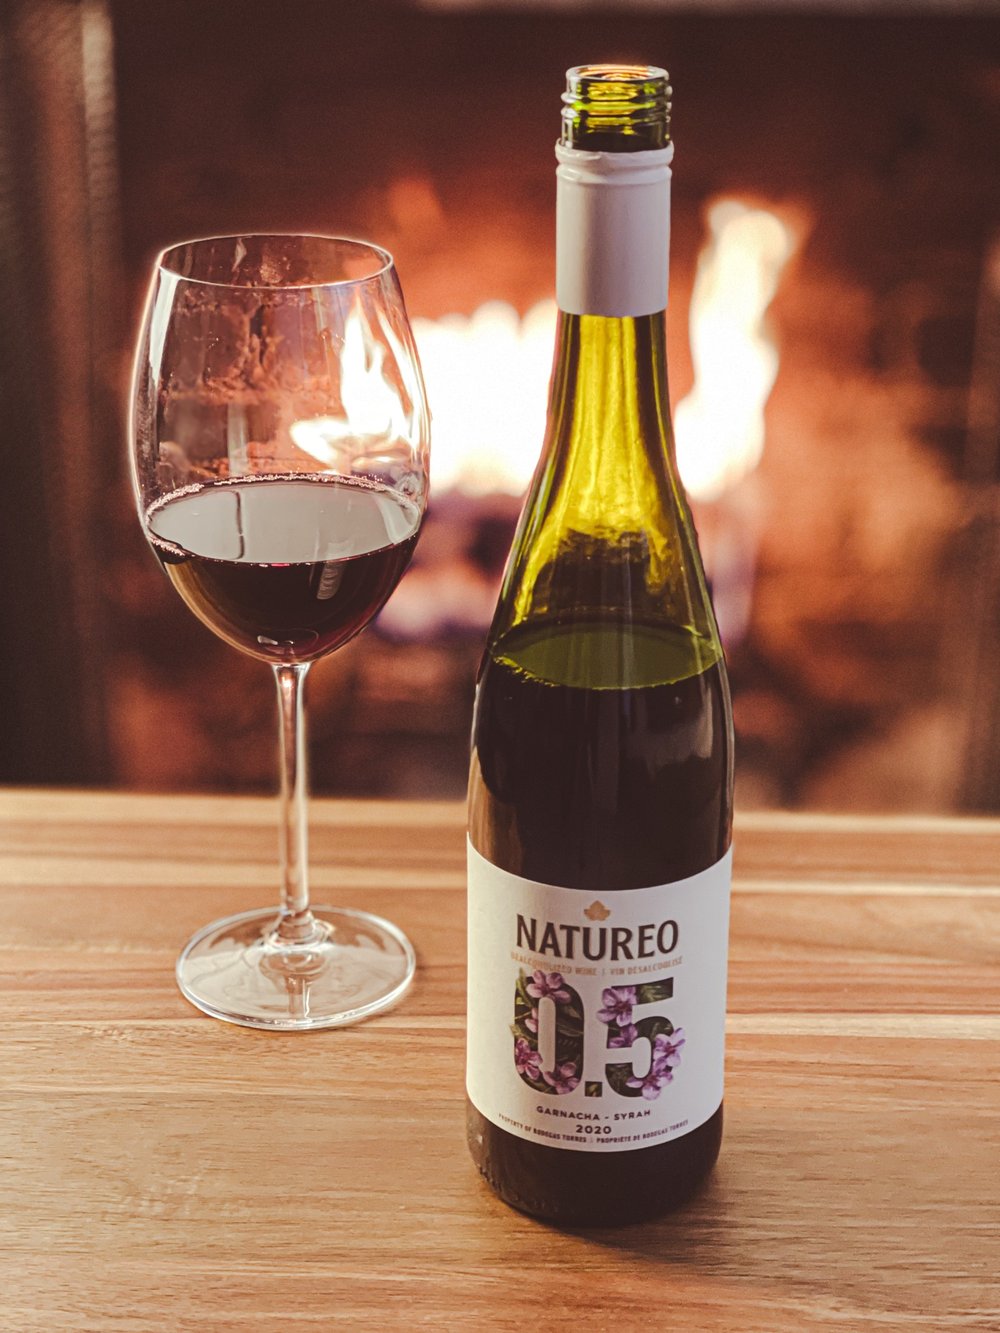 Natureo - Non alcoholic Spanish red wine review — Some Good Clean Fun